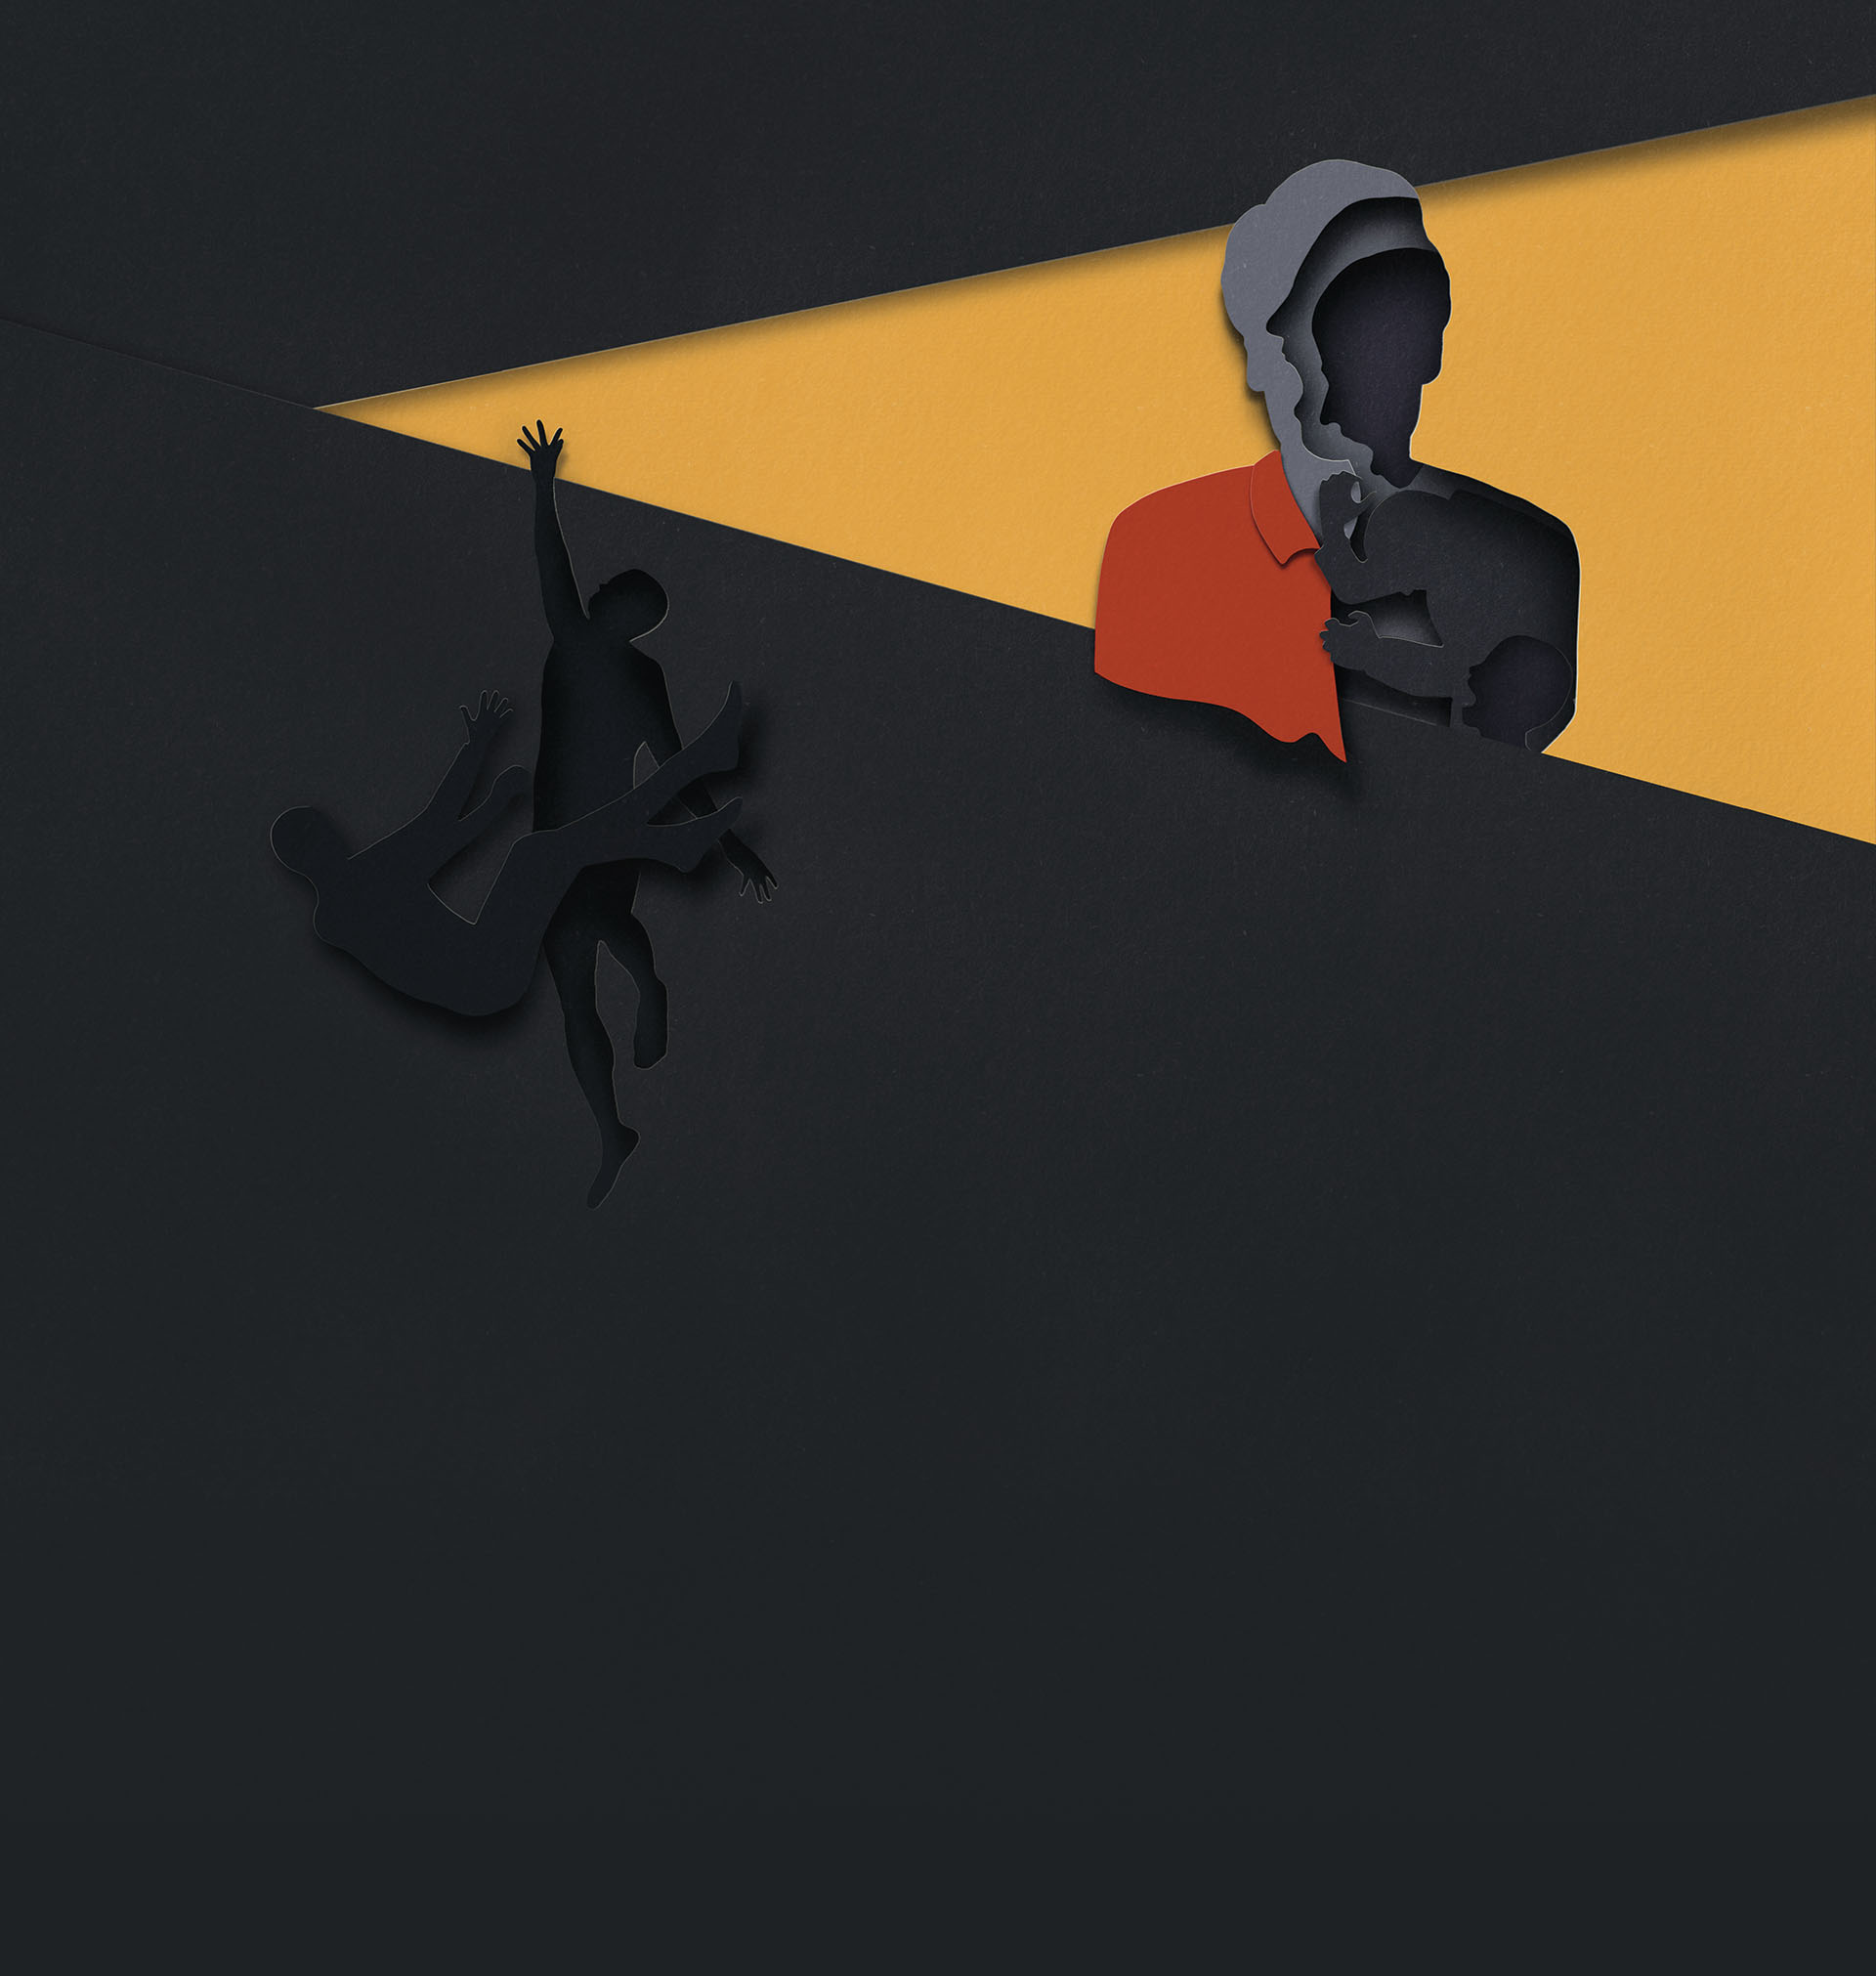 Layers of paper creating the silhouette of a person highlighted by a spotlight. A second figure cut out of paper is reaching up towards the person in the spotlight.